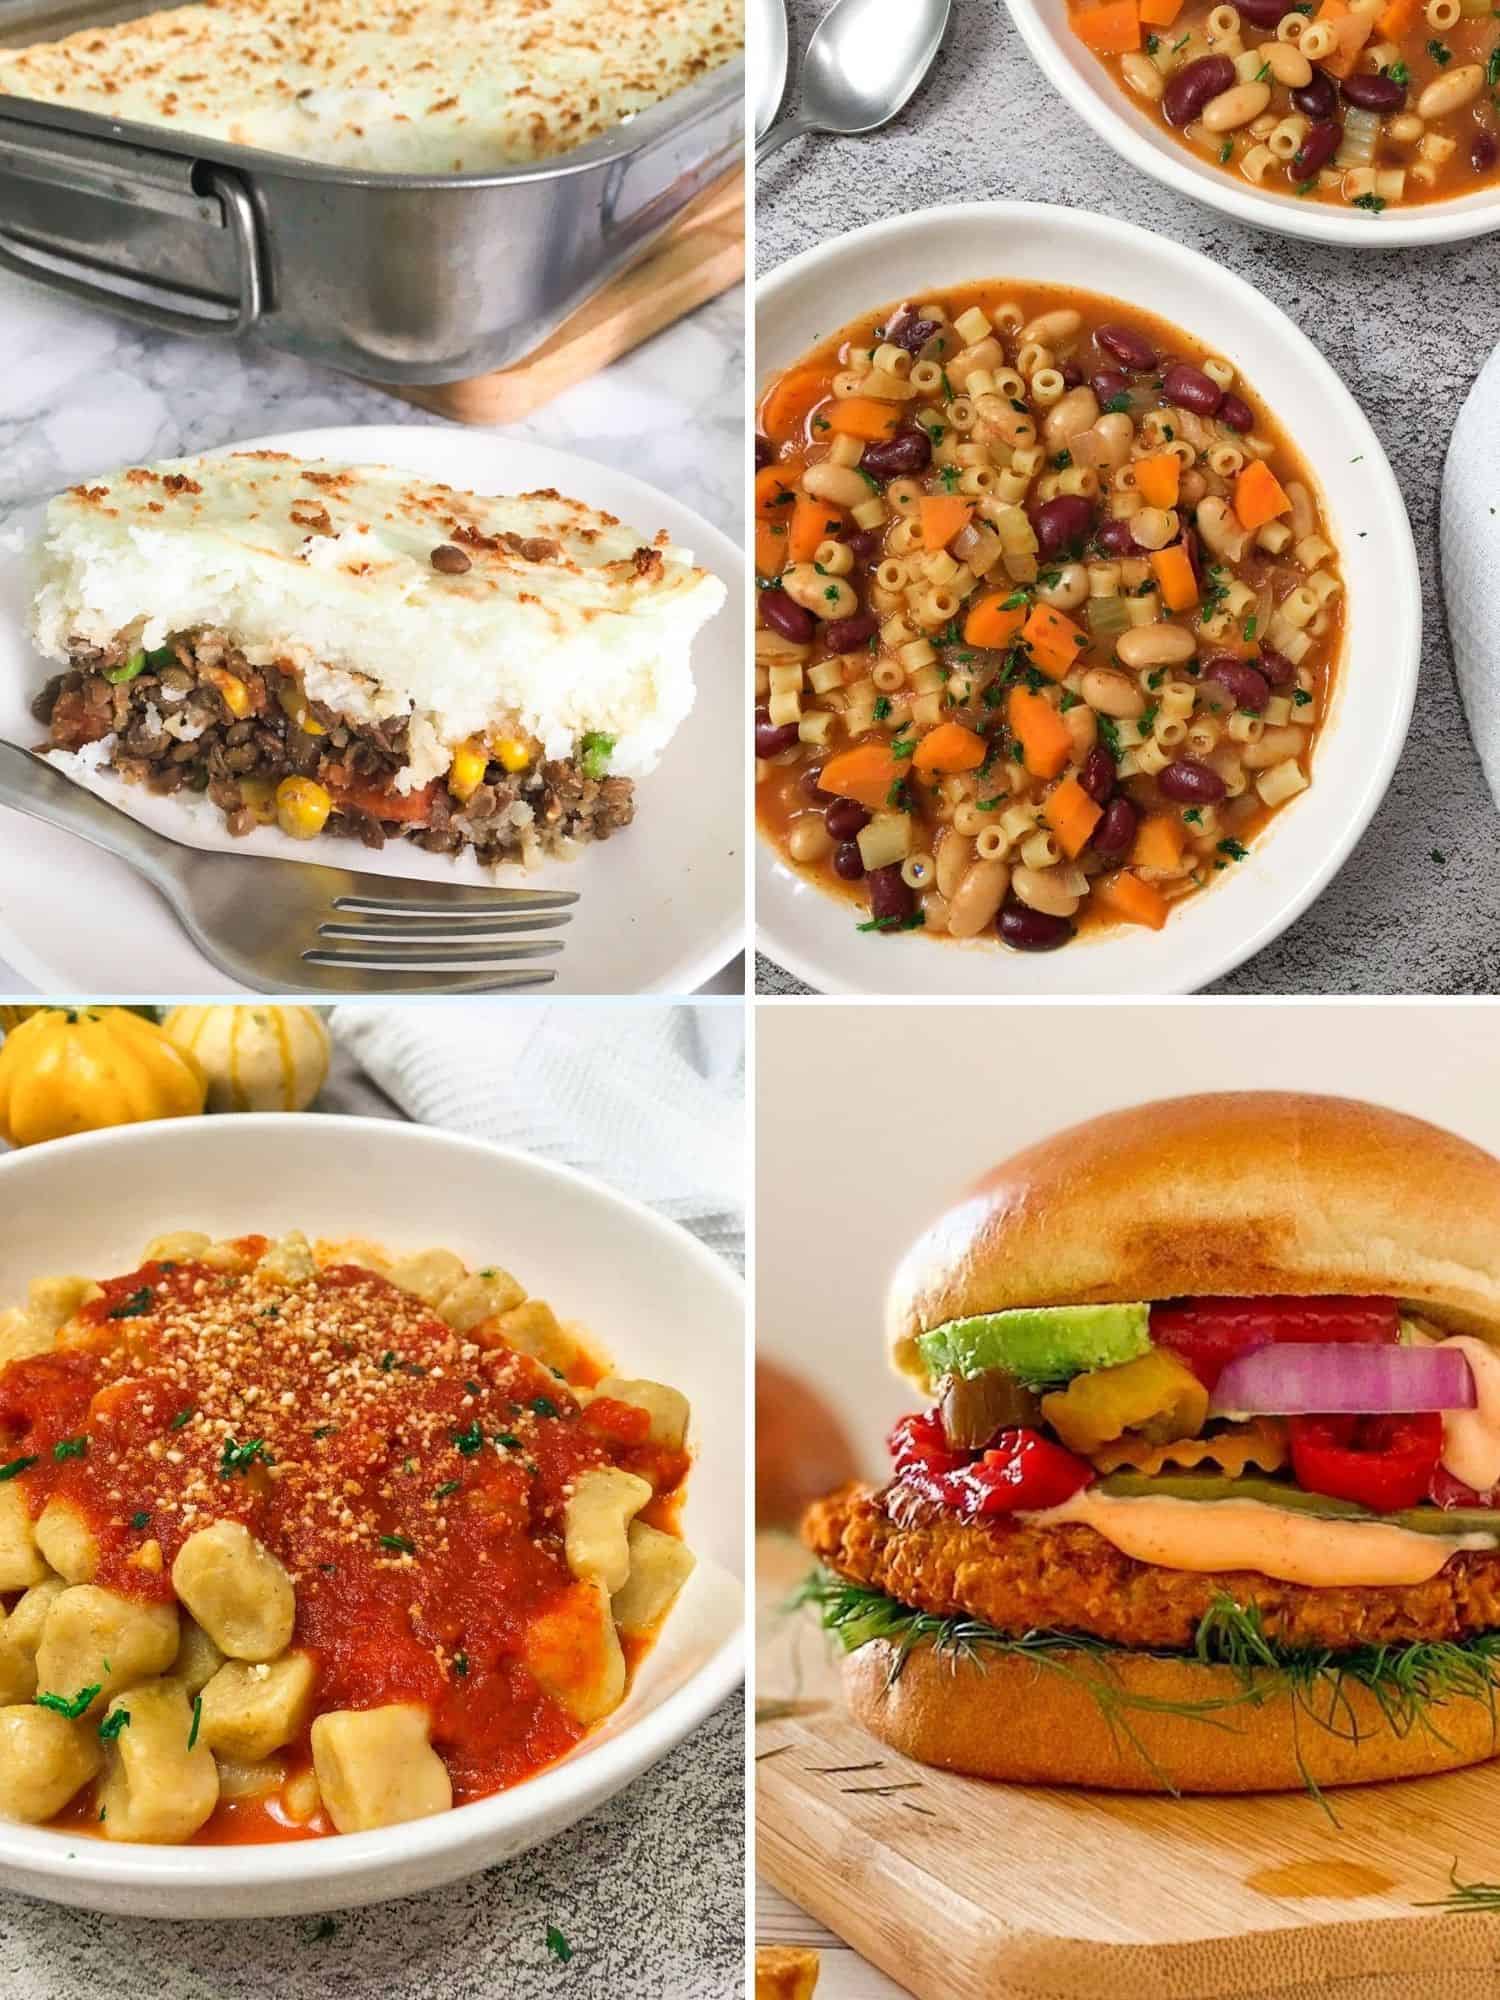 collage of 4 recipes: shepherd's pie, pasta and beans, gnocchi, and a vegan burger